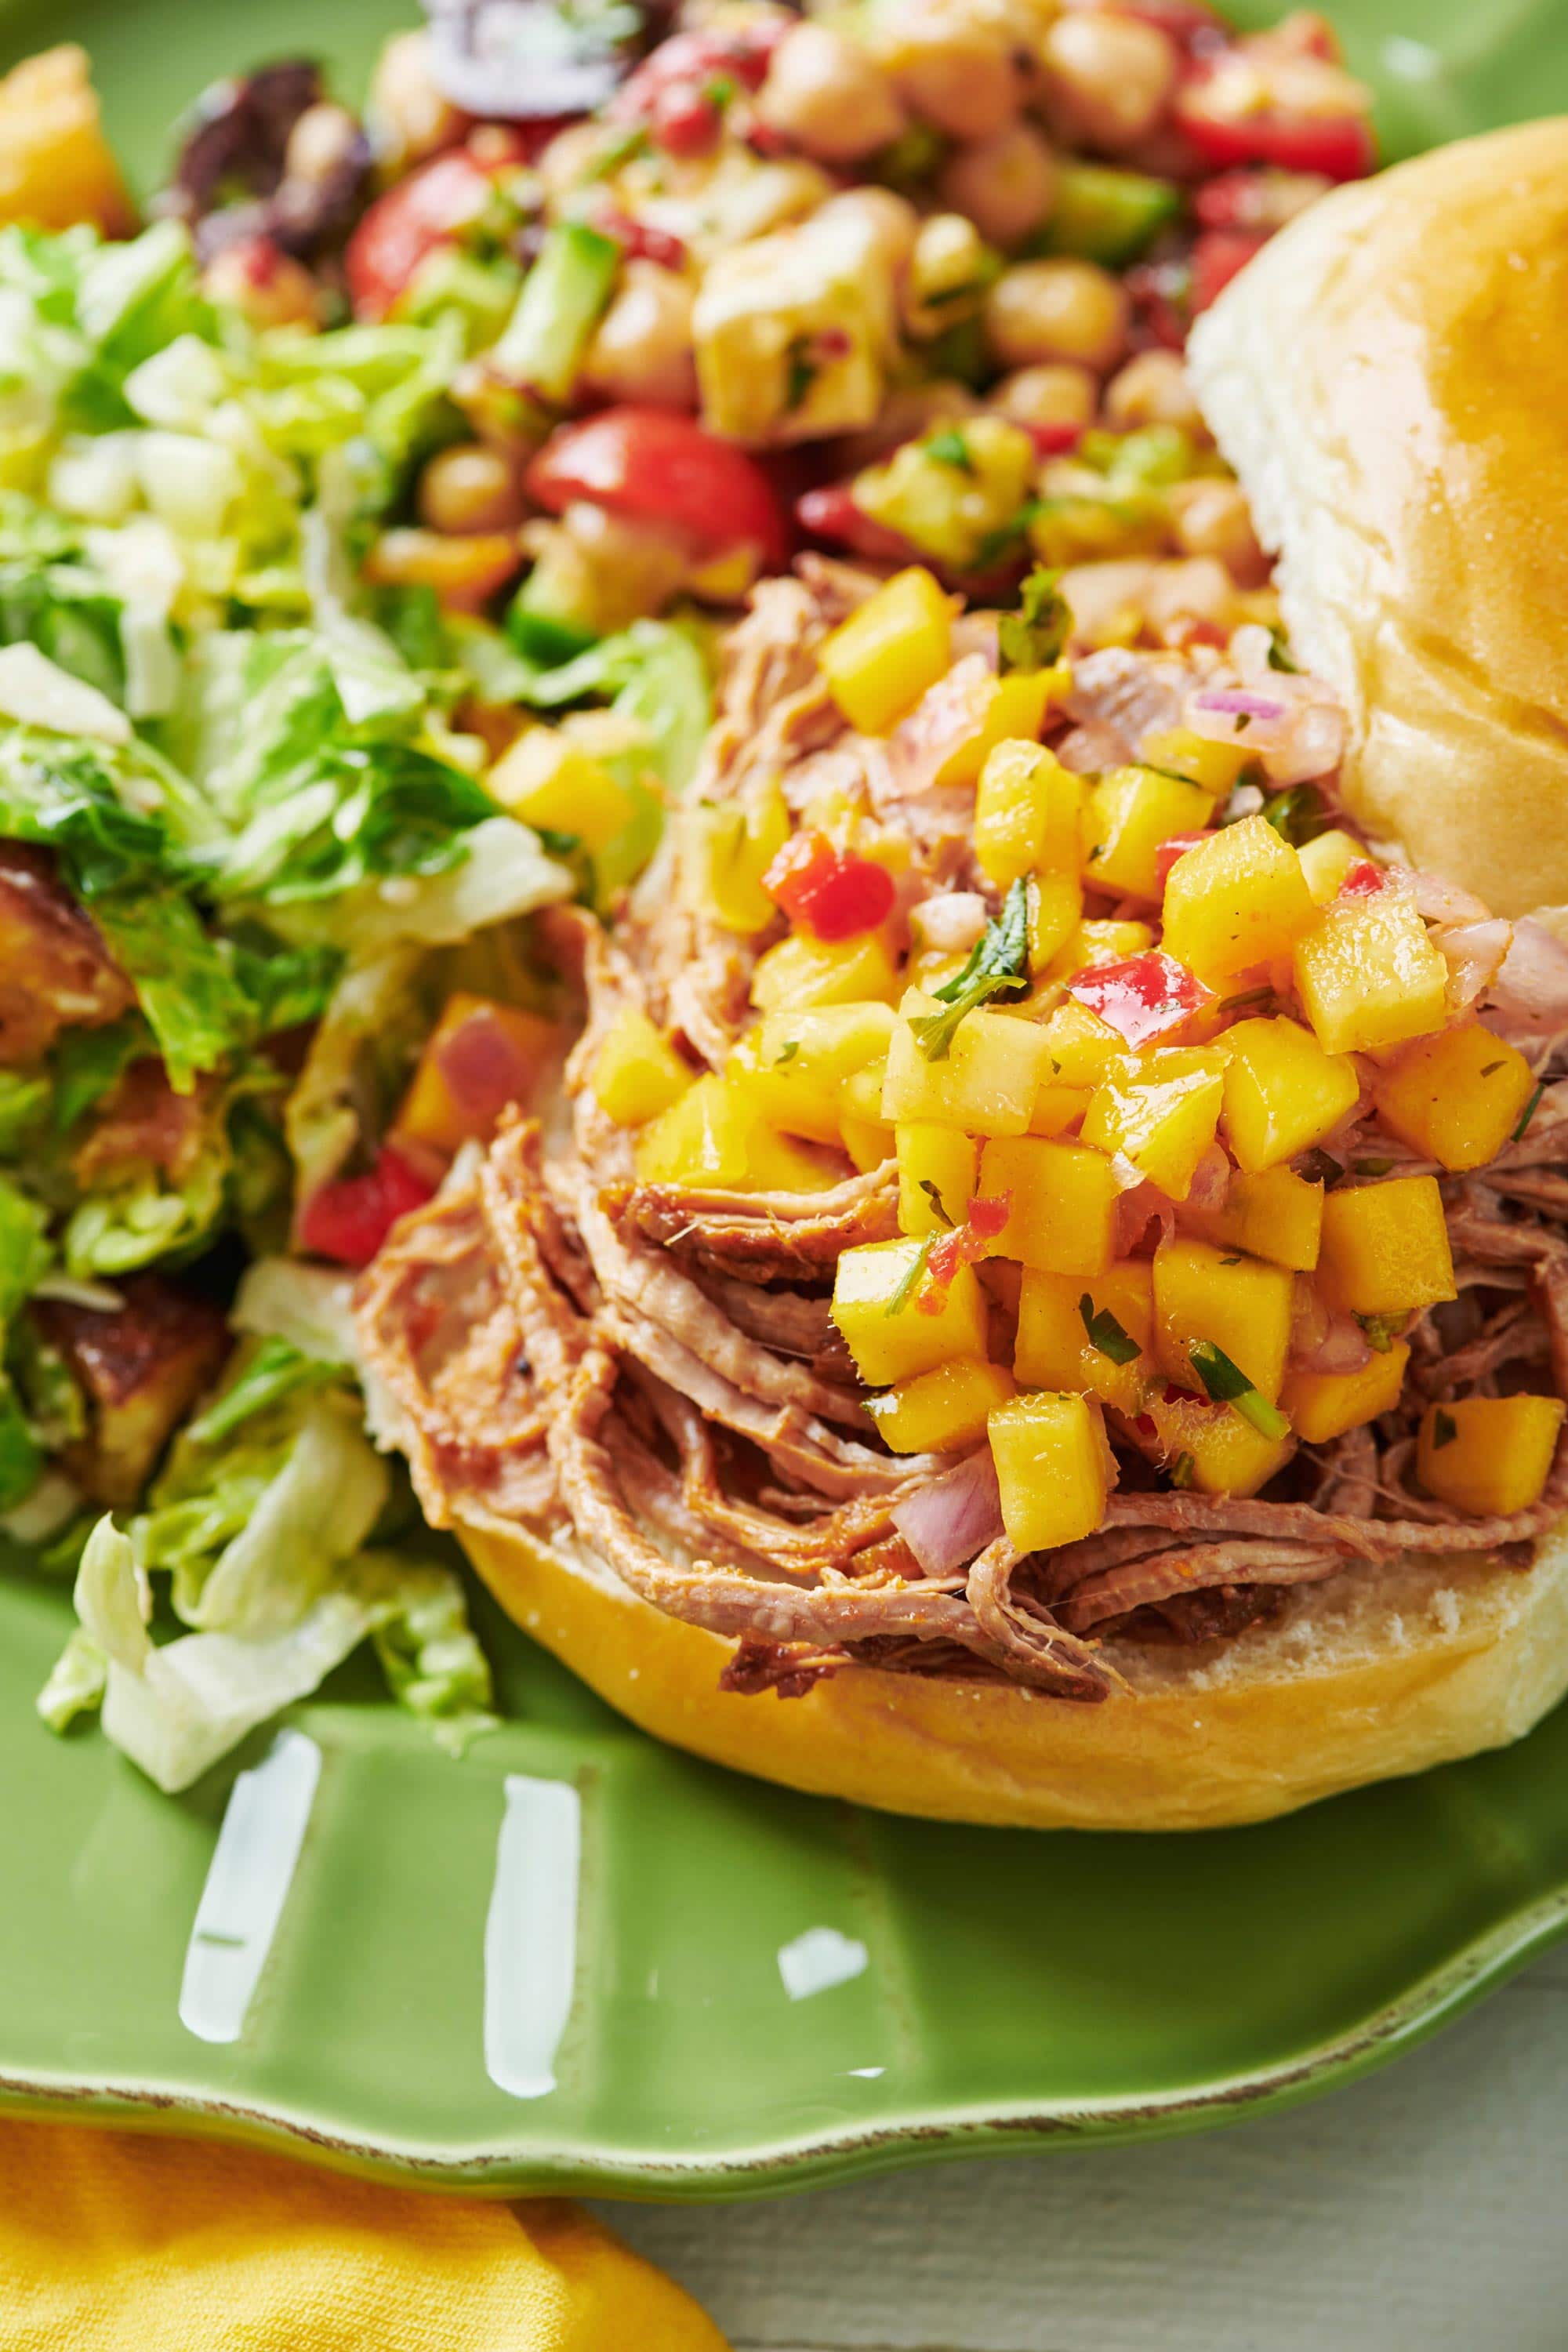 Slow Cooker Barbecue Pulled Pork on a bun with tropical fruit salsa.